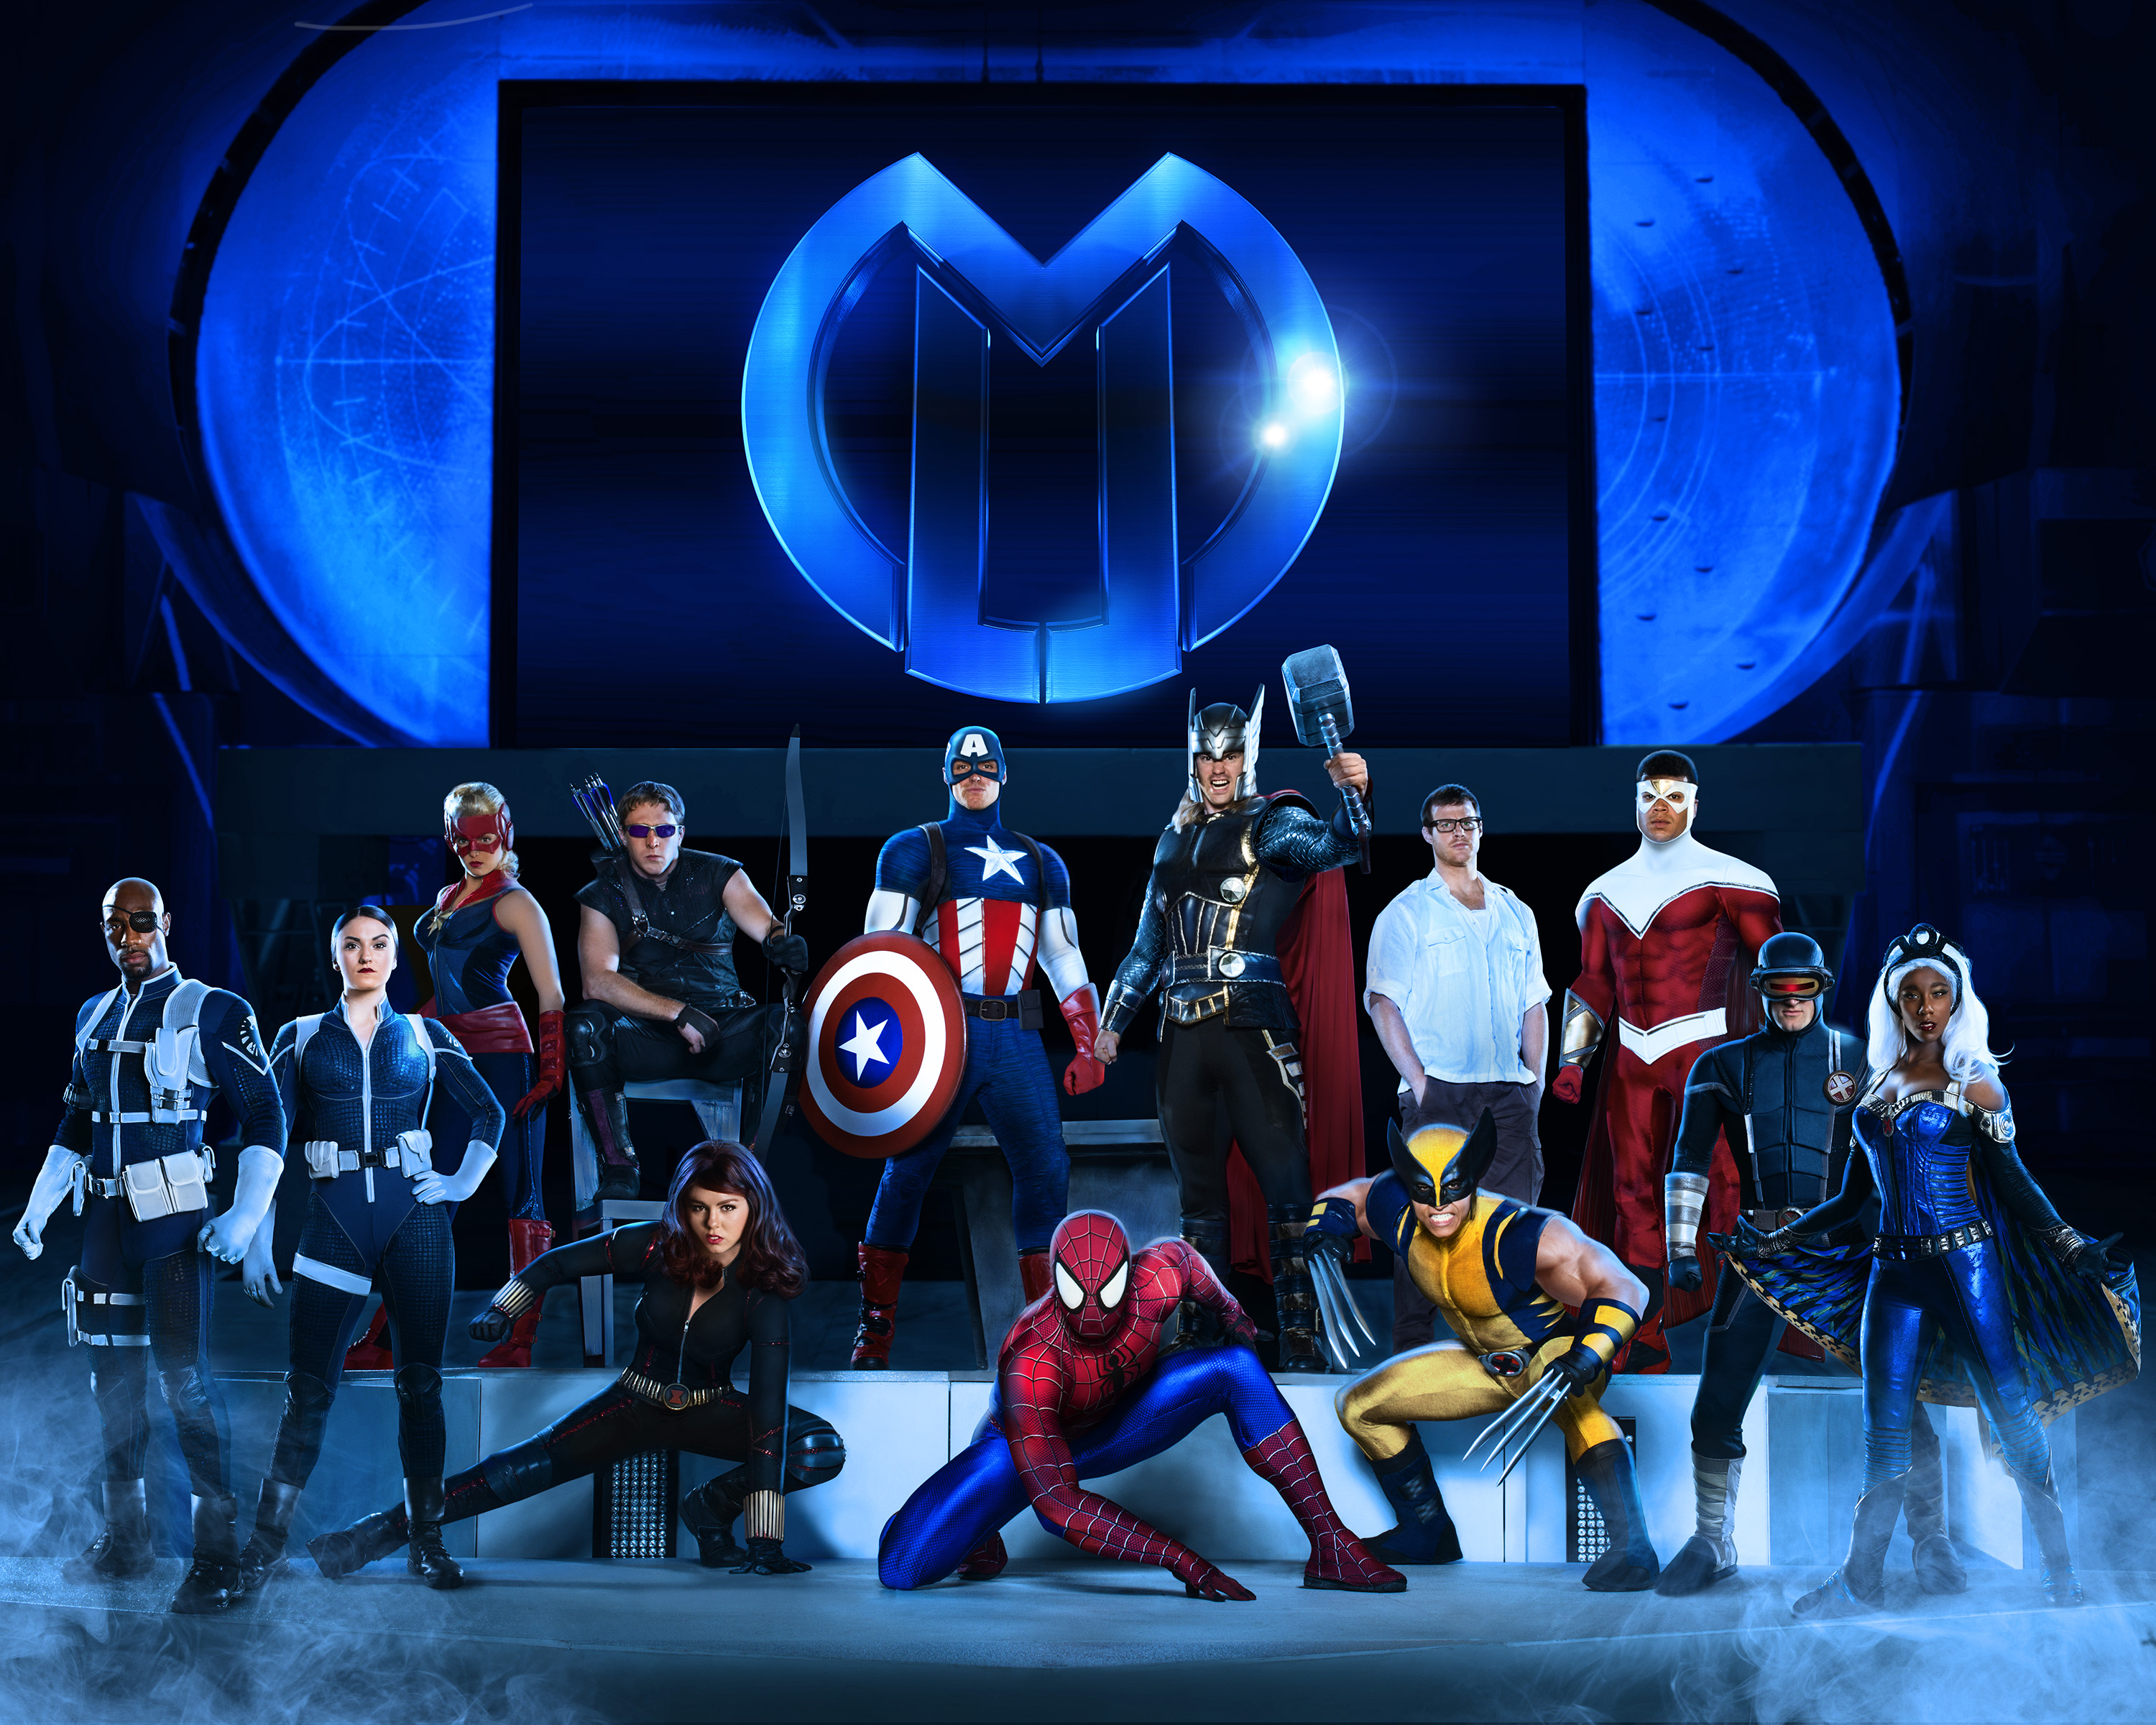 Marvel Universe LIVE! Coming to the Orlando Amway Center #MarvelUniverseLIVE